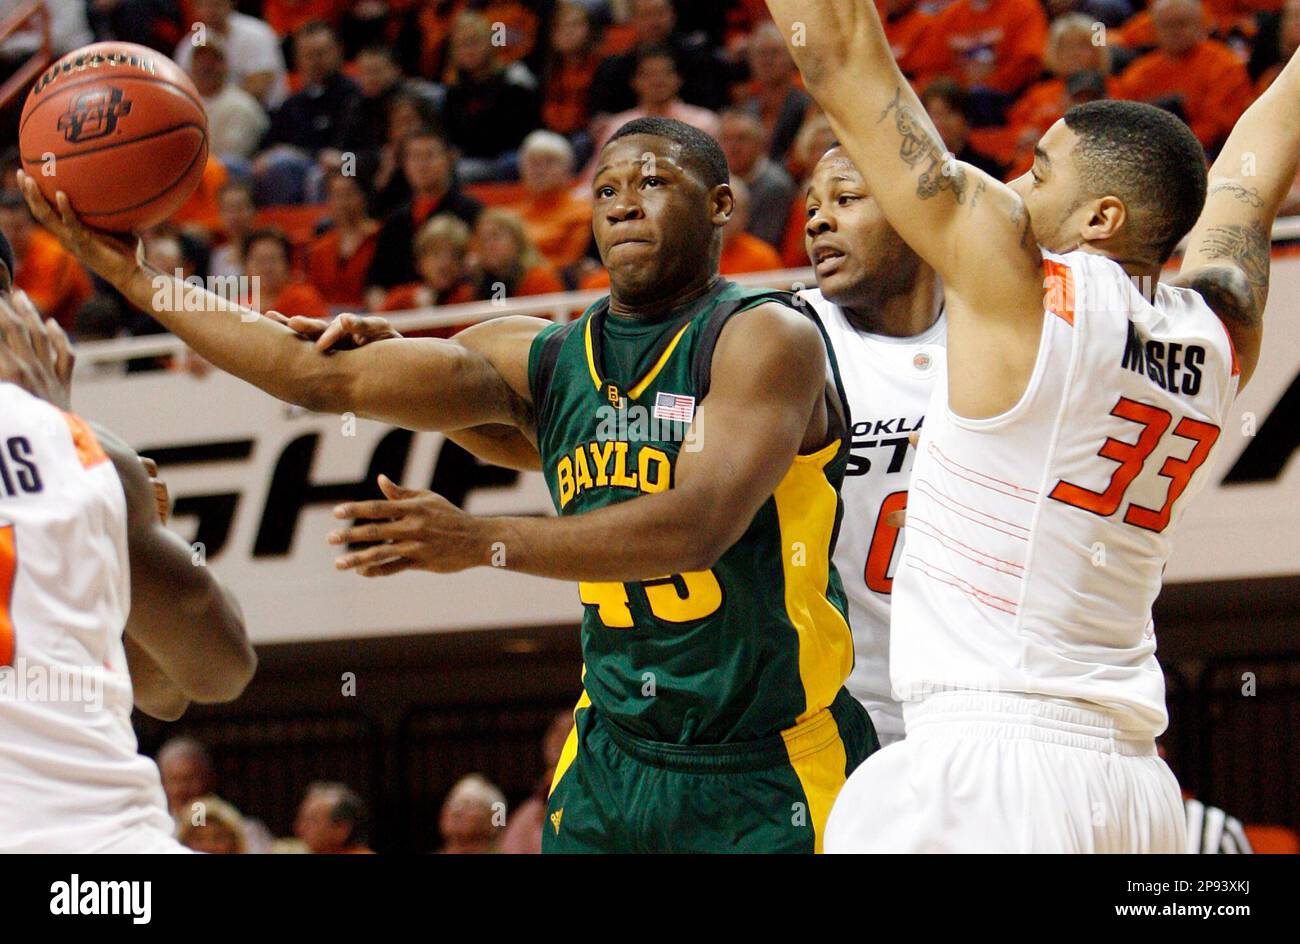 Baylor's Tweety Carter (45) shoots as Oklahoma State's Marshall Moses (33),  right, and Byron Eaton (00) defend in the first half of the NCAA college  basketball game at Gallagher-Iba Arena in Stillwater,